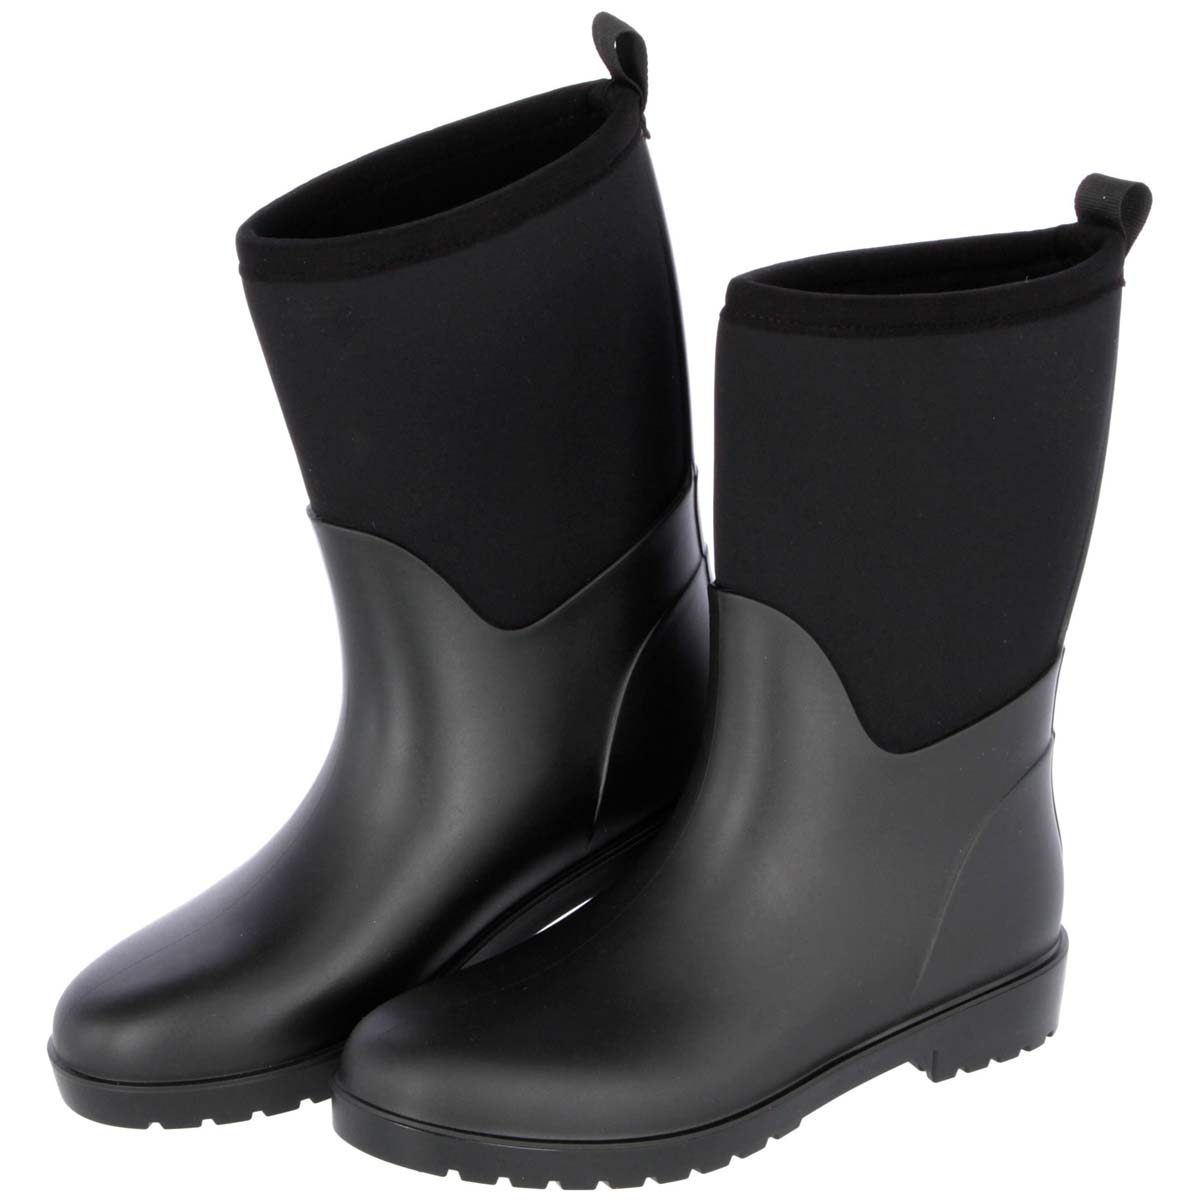 Boots NeoLite 39